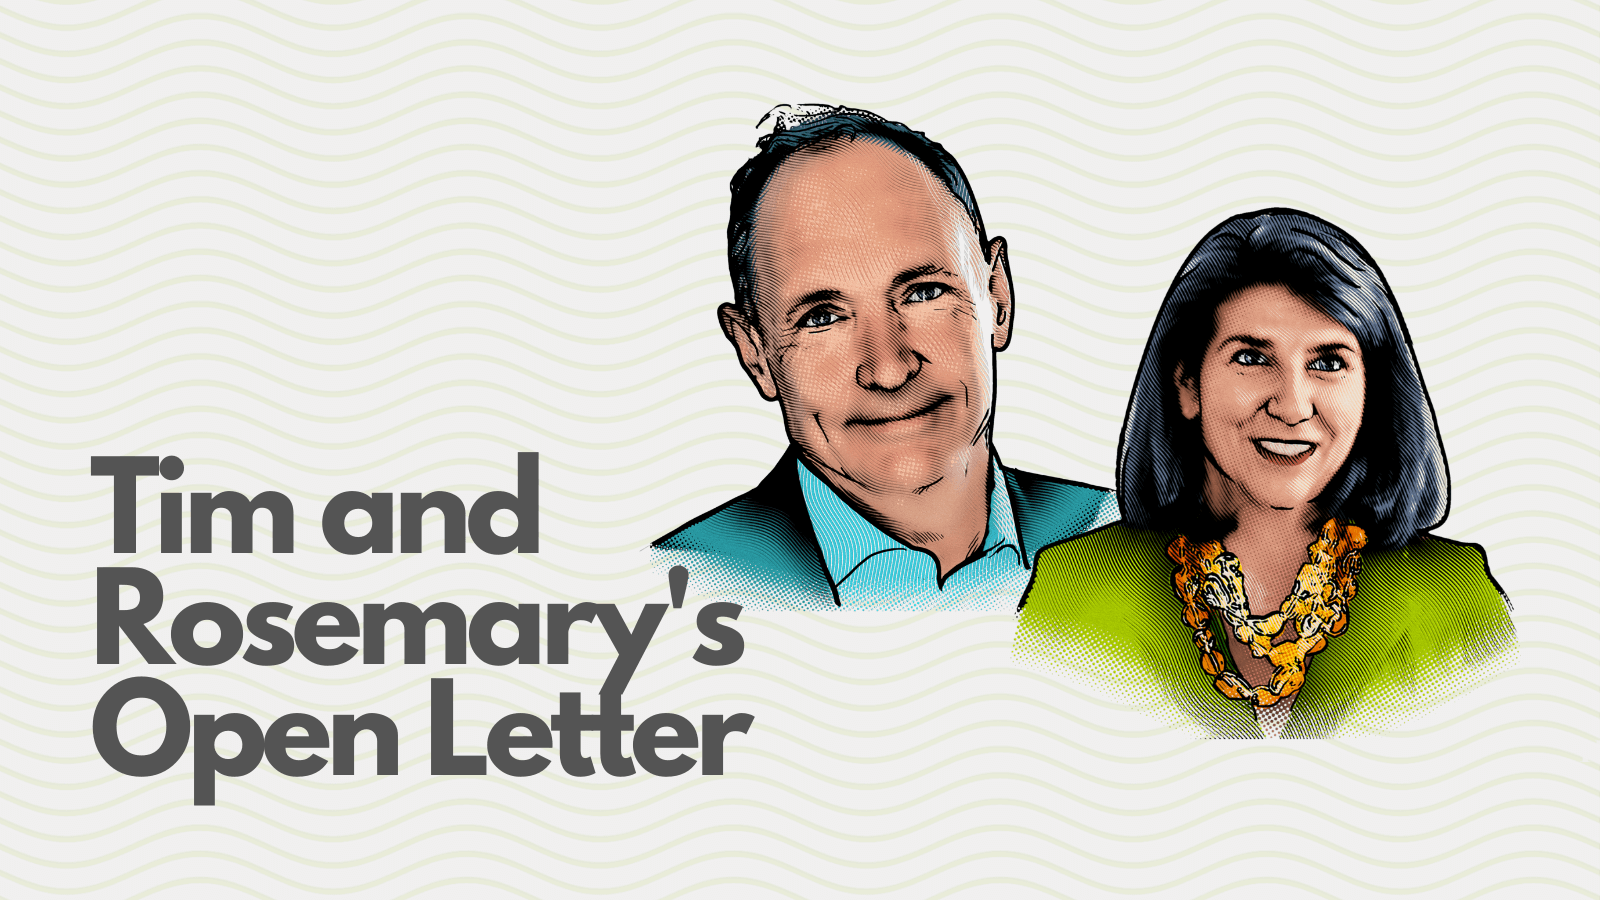 Tim and Rosemary's Open Letter